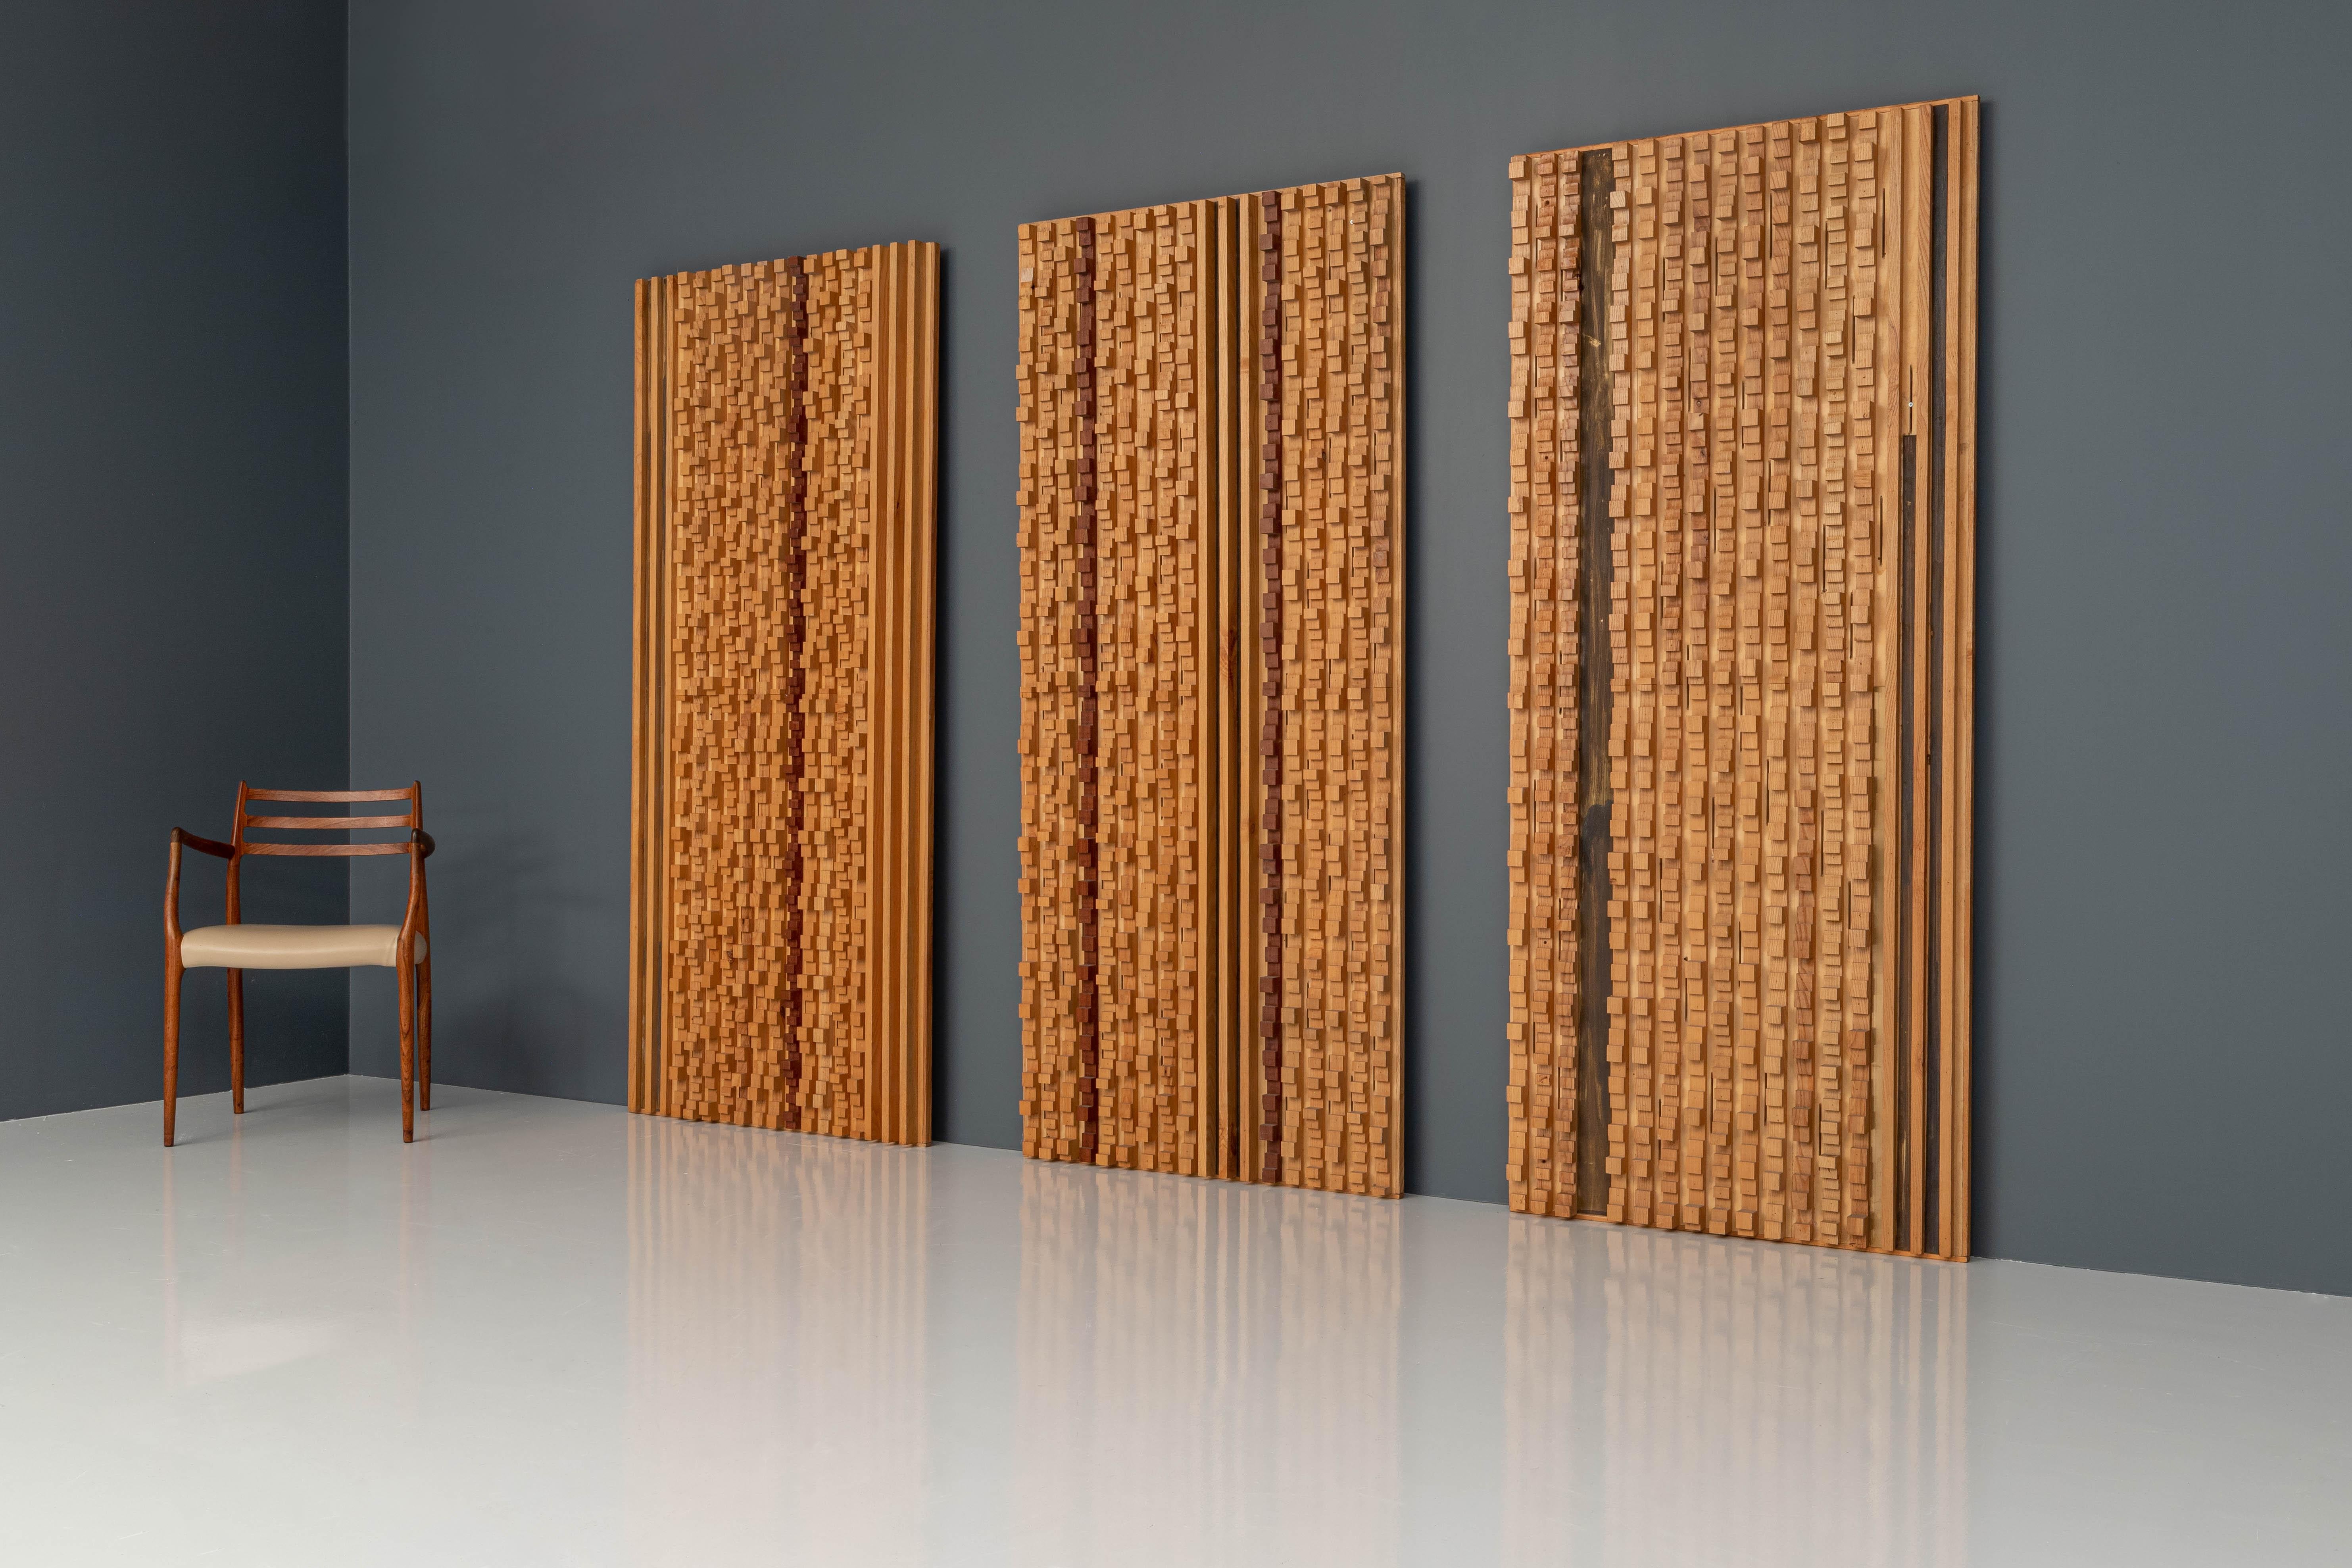 Italian Set of 3 Wall Panels and 2 Cabinets by Stefano d'Amico, Italy, 1975 For Sale